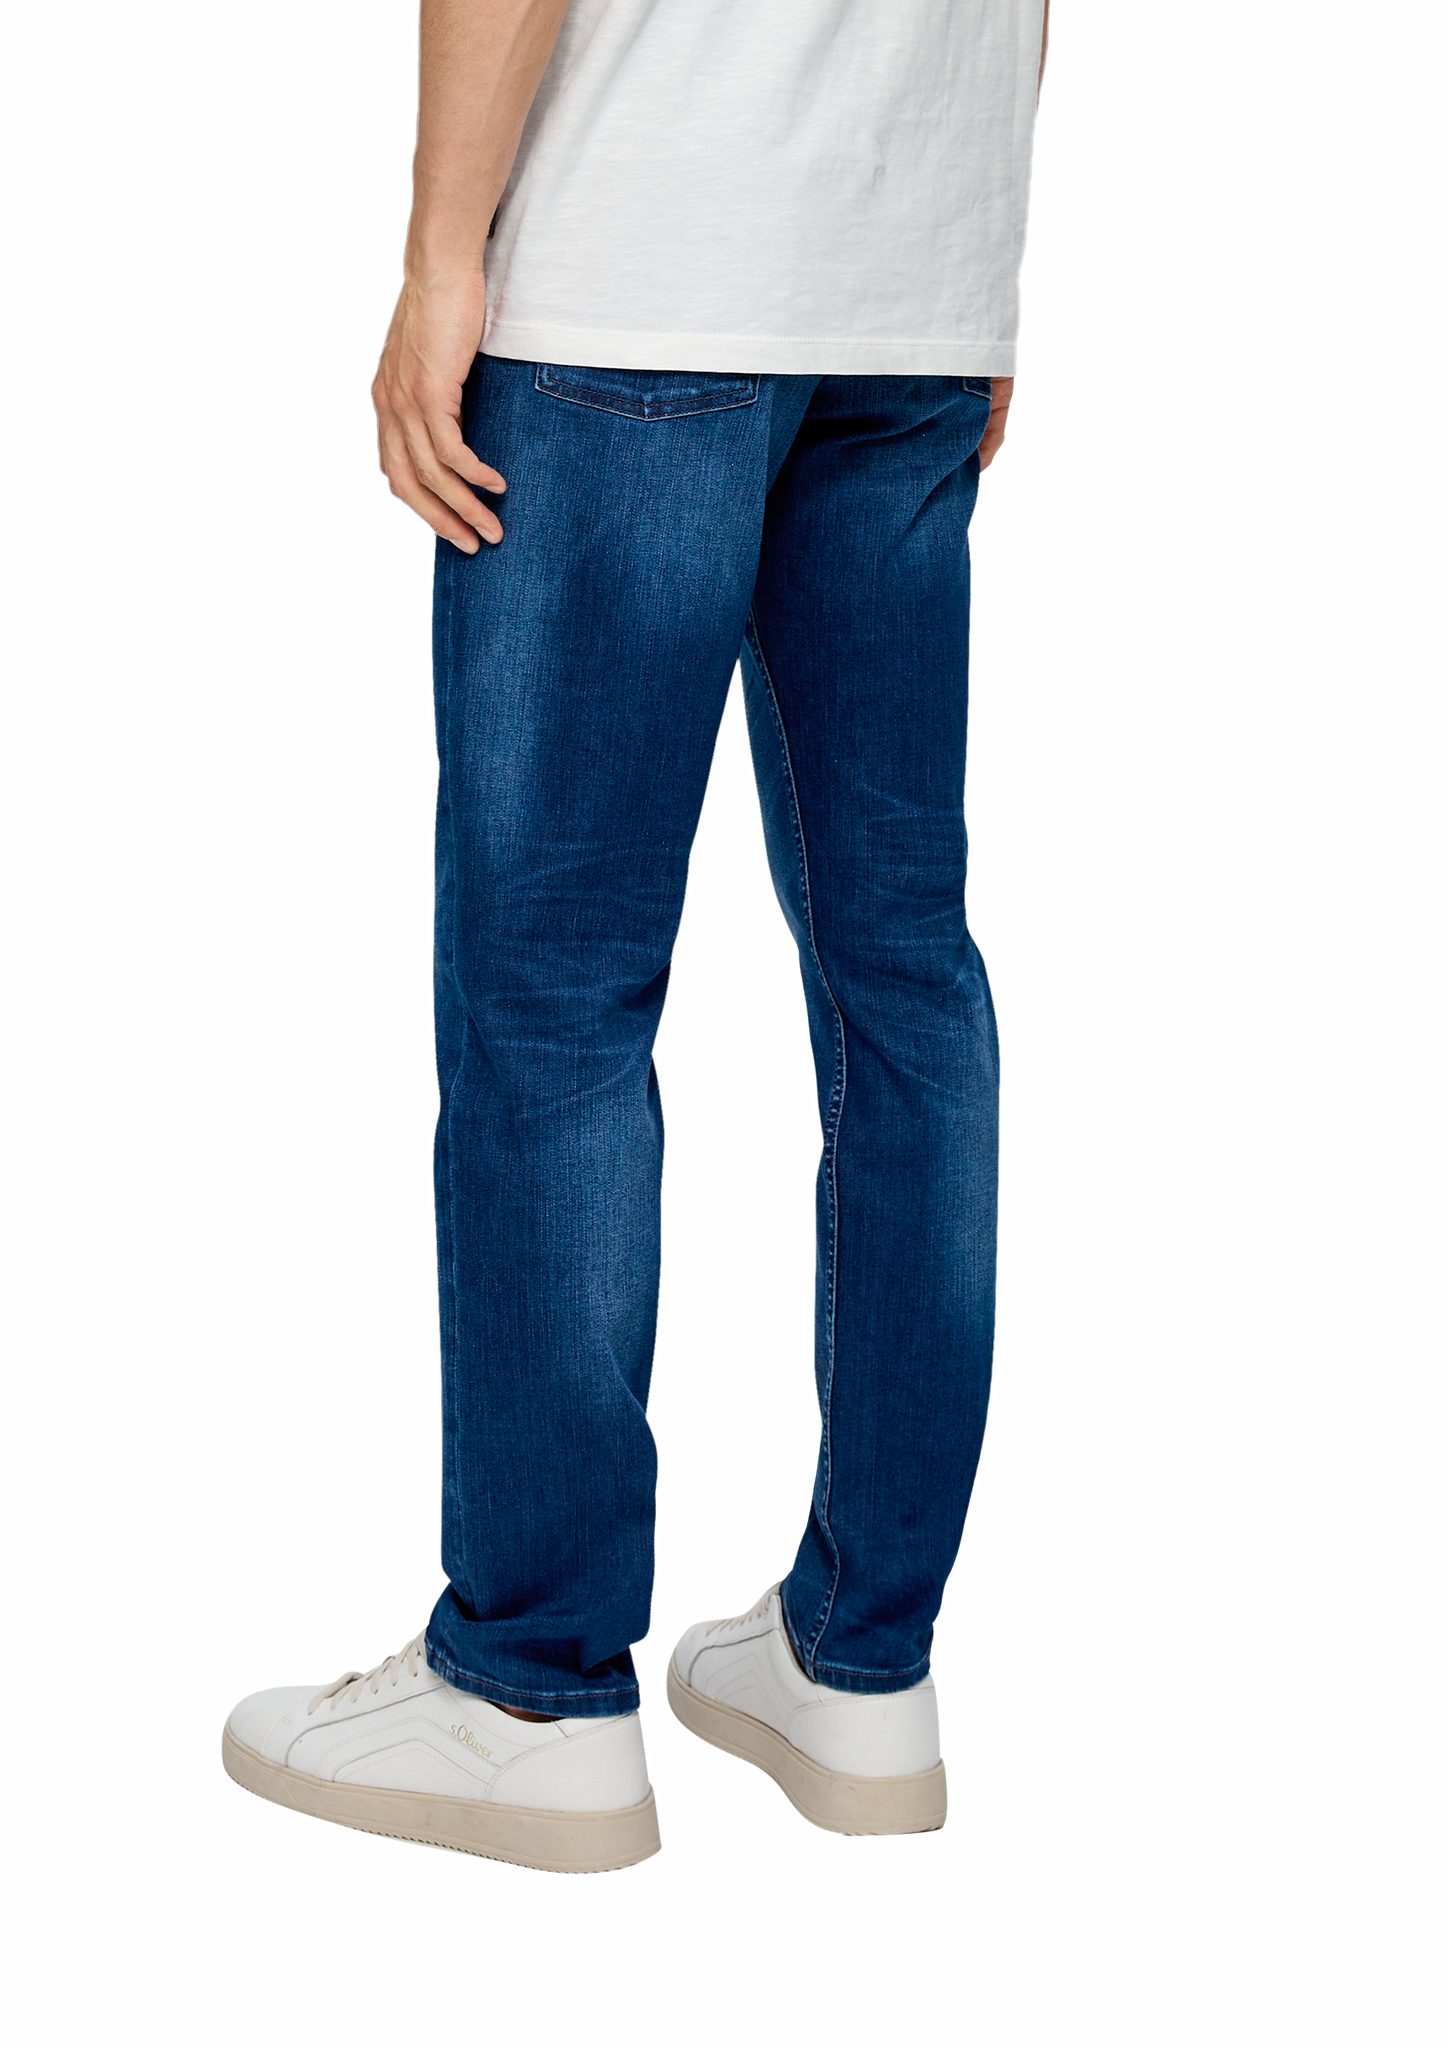 Patch Jeans dunkelblau Stoffhose Label Rise s.Oliver Straight Label-Patch / Slim / Waschung, Mid / Fit Leg / Keith